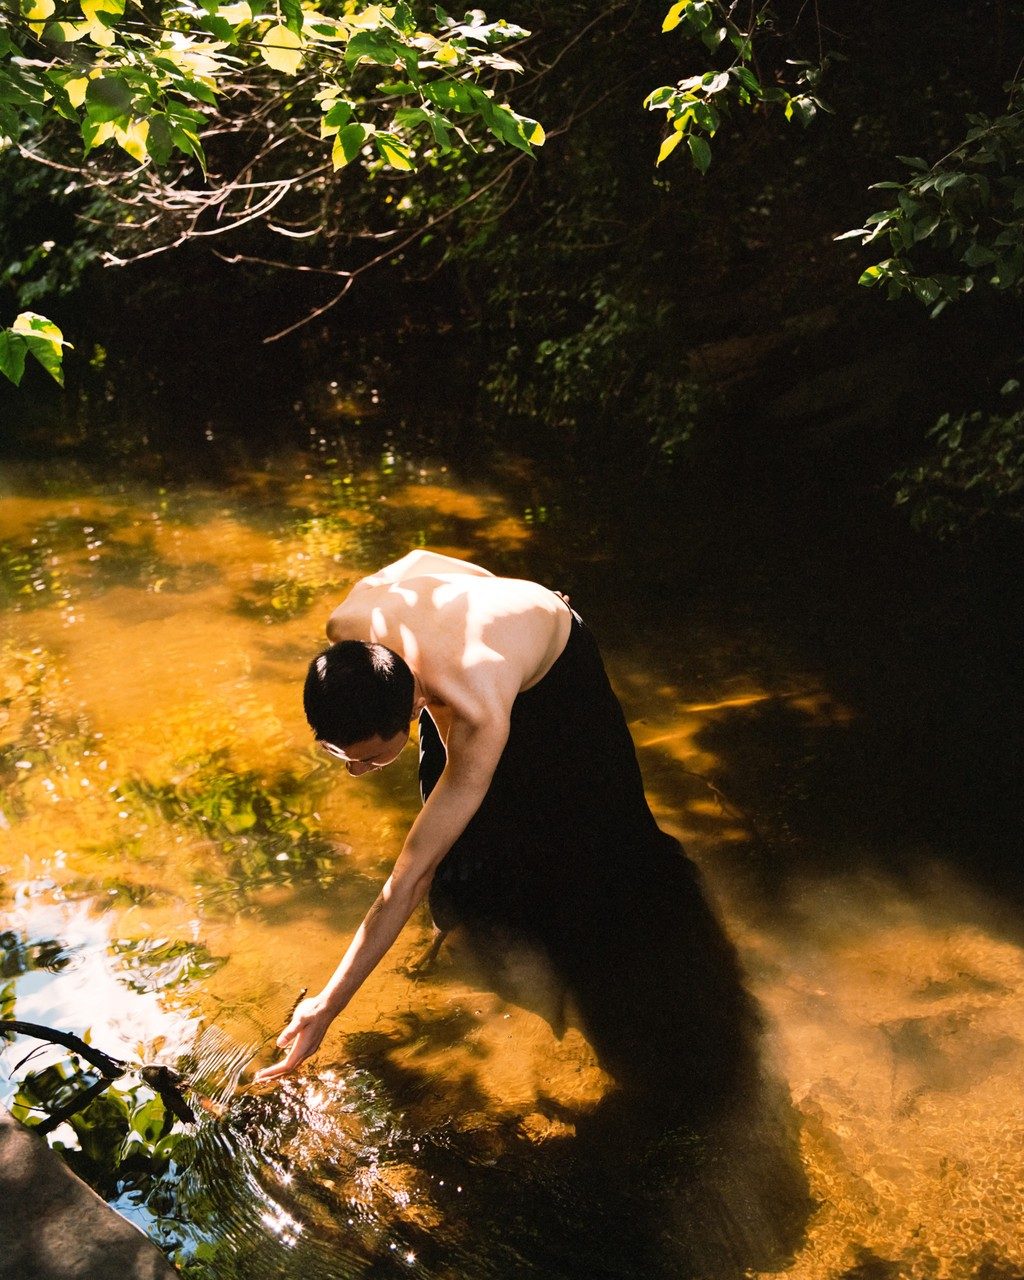 photographic portrait in colour of young person of vietnamese descent standing in a river and gently touching the water on a warm summer day